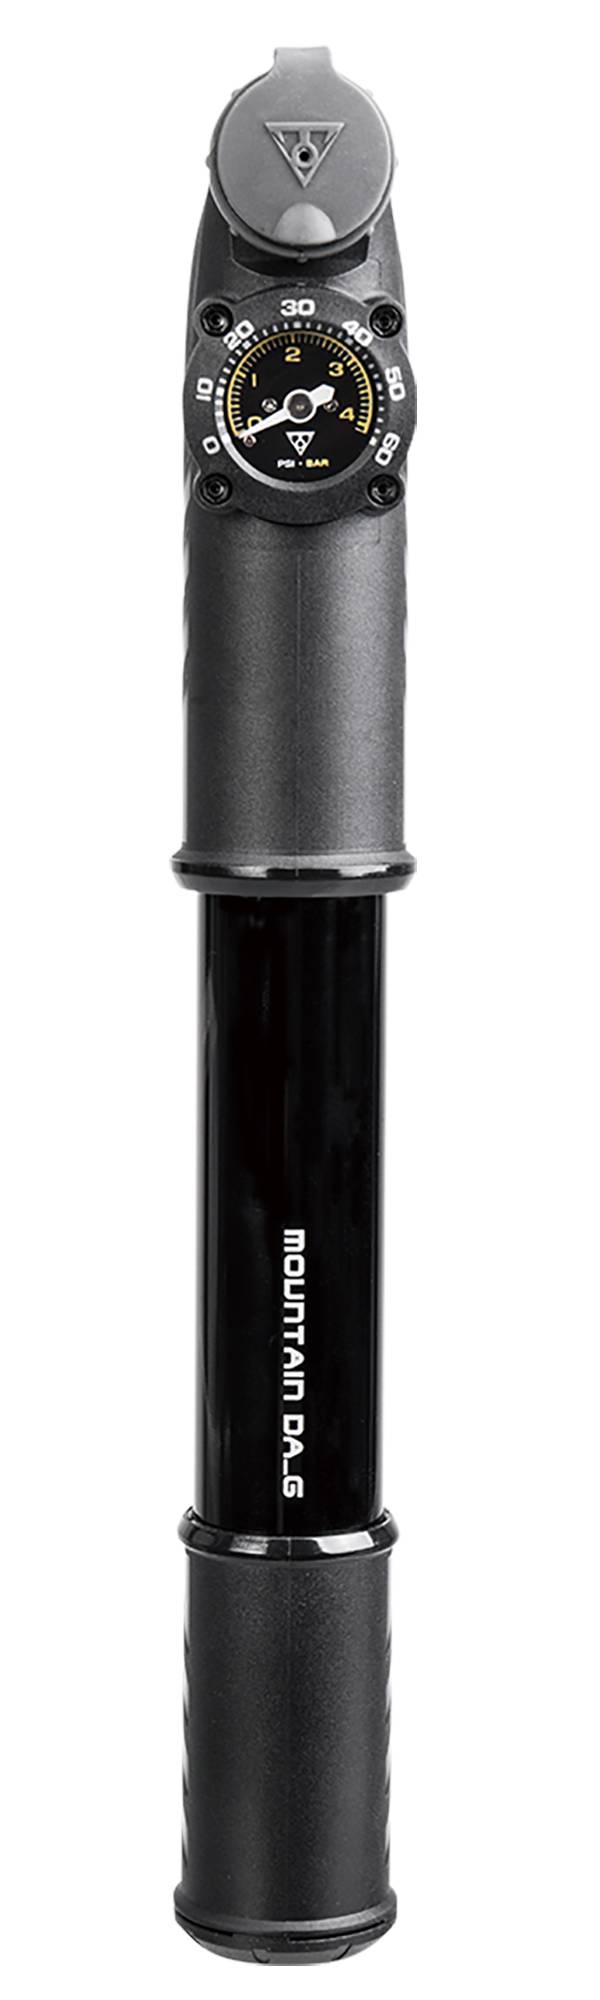 Topeak Mountain Dual-Action Pump with Gauge product image